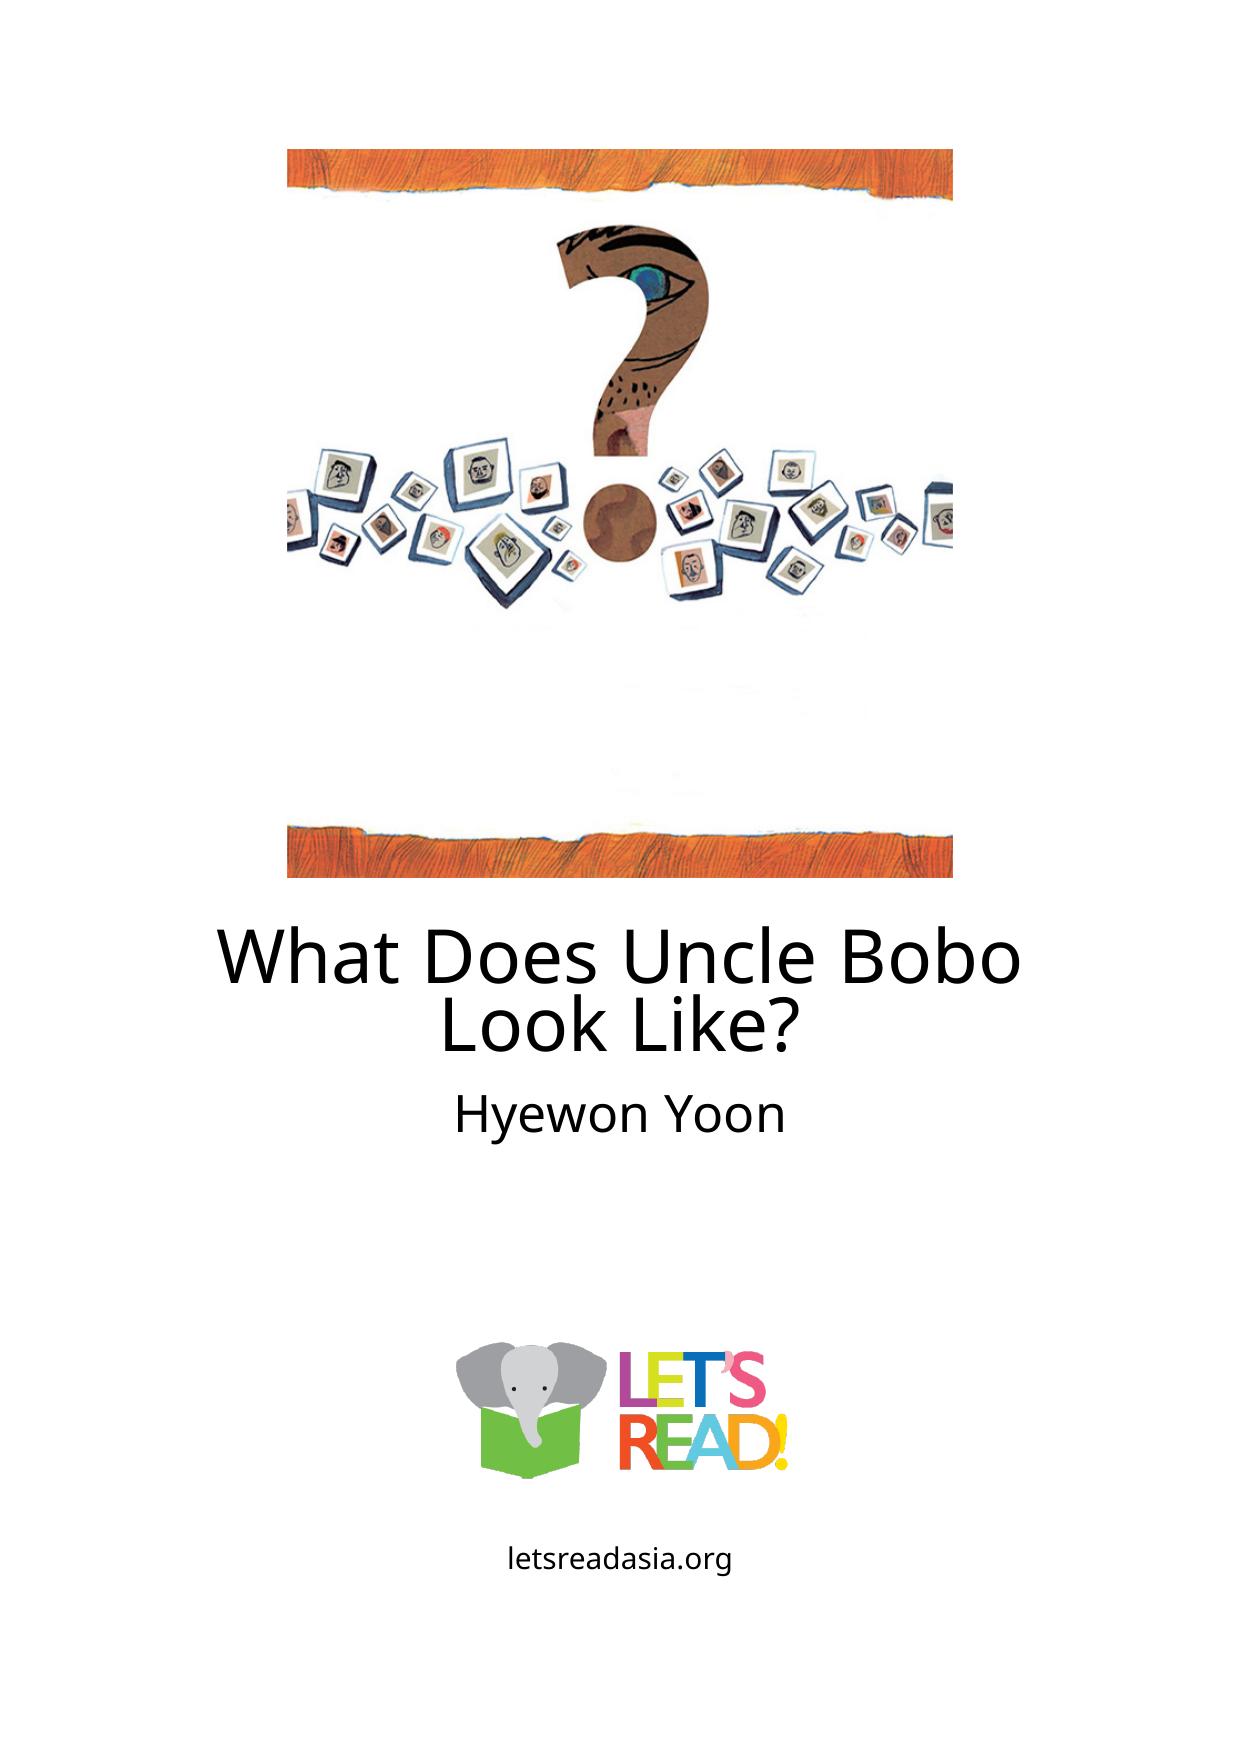 What Does Uncle Bobo Look Like?